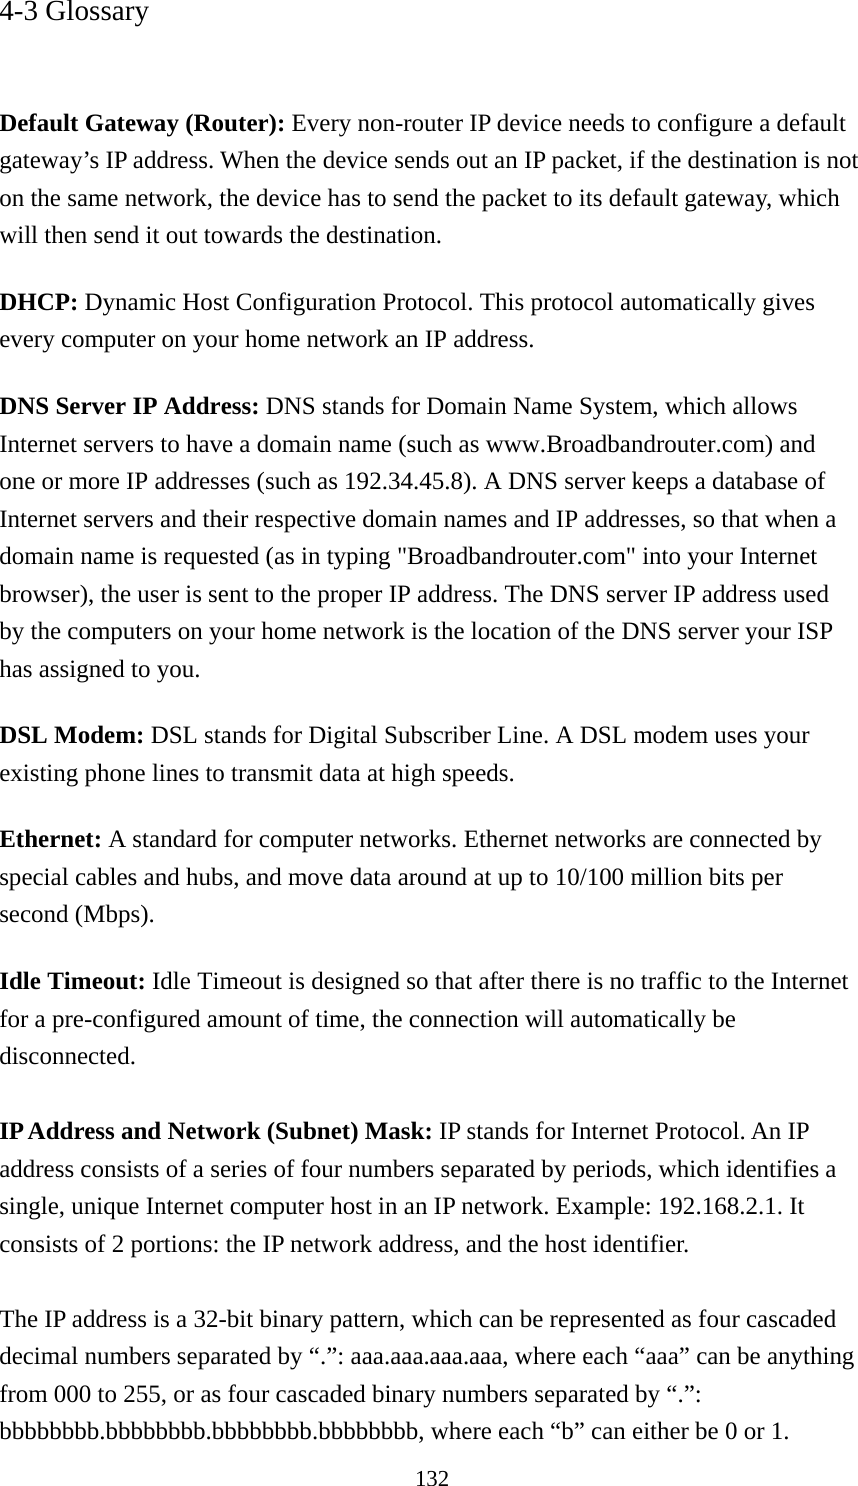 132 4-3 Glossary   Default Gateway (Router): Every non-router IP device needs to configure a default gateway’s IP address. When the device sends out an IP packet, if the destination is not on the same network, the device has to send the packet to its default gateway, which will then send it out towards the destination. DHCP: Dynamic Host Configuration Protocol. This protocol automatically gives every computer on your home network an IP address. DNS Server IP Address: DNS stands for Domain Name System, which allows Internet servers to have a domain name (such as www.Broadbandrouter.com) and one or more IP addresses (such as 192.34.45.8). A DNS server keeps a database of Internet servers and their respective domain names and IP addresses, so that when a domain name is requested (as in typing &quot;Broadbandrouter.com&quot; into your Internet browser), the user is sent to the proper IP address. The DNS server IP address used by the computers on your home network is the location of the DNS server your ISP has assigned to you.   DSL Modem: DSL stands for Digital Subscriber Line. A DSL modem uses your existing phone lines to transmit data at high speeds.   Ethernet: A standard for computer networks. Ethernet networks are connected by special cables and hubs, and move data around at up to 10/100 million bits per second (Mbps).   Idle Timeout: Idle Timeout is designed so that after there is no traffic to the Internet for a pre-configured amount of time, the connection will automatically be disconnected.  IP Address and Network (Subnet) Mask: IP stands for Internet Protocol. An IP address consists of a series of four numbers separated by periods, which identifies a single, unique Internet computer host in an IP network. Example: 192.168.2.1. It consists of 2 portions: the IP network address, and the host identifier.  The IP address is a 32-bit binary pattern, which can be represented as four cascaded decimal numbers separated by “.”: aaa.aaa.aaa.aaa, where each “aaa” can be anything from 000 to 255, or as four cascaded binary numbers separated by “.”: bbbbbbbb.bbbbbbbb.bbbbbbbb.bbbbbbbb, where each “b” can either be 0 or 1. 